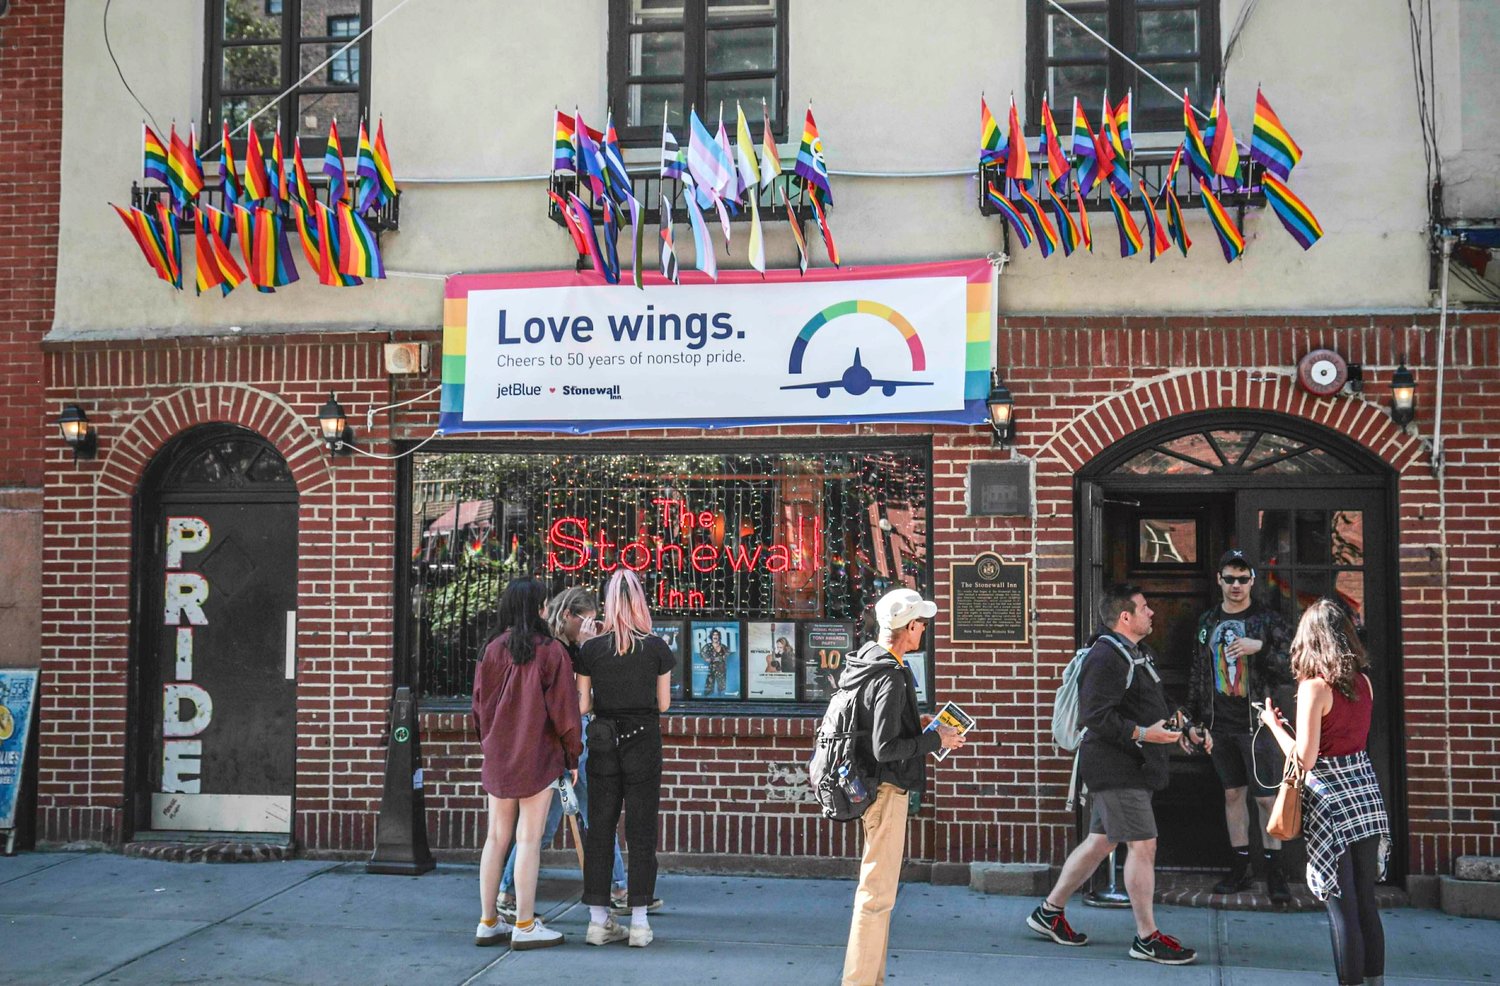 In this Monday, June 3, 2019, photo, Pride flags and colors display on the Stonewall Inn bar, marking the site of 1969 riots that followed a police raid of the bar’s gay patrons, in New York. A visitor center dedicated to telling the story of LGBTQ rights movement will open next door to the Stonewall Inn. Organizers say the groundbreaking for the Stonewall National Monument Visitor Center in New York City’s Greenwich Village neighborhood will take place Friday, June 24.